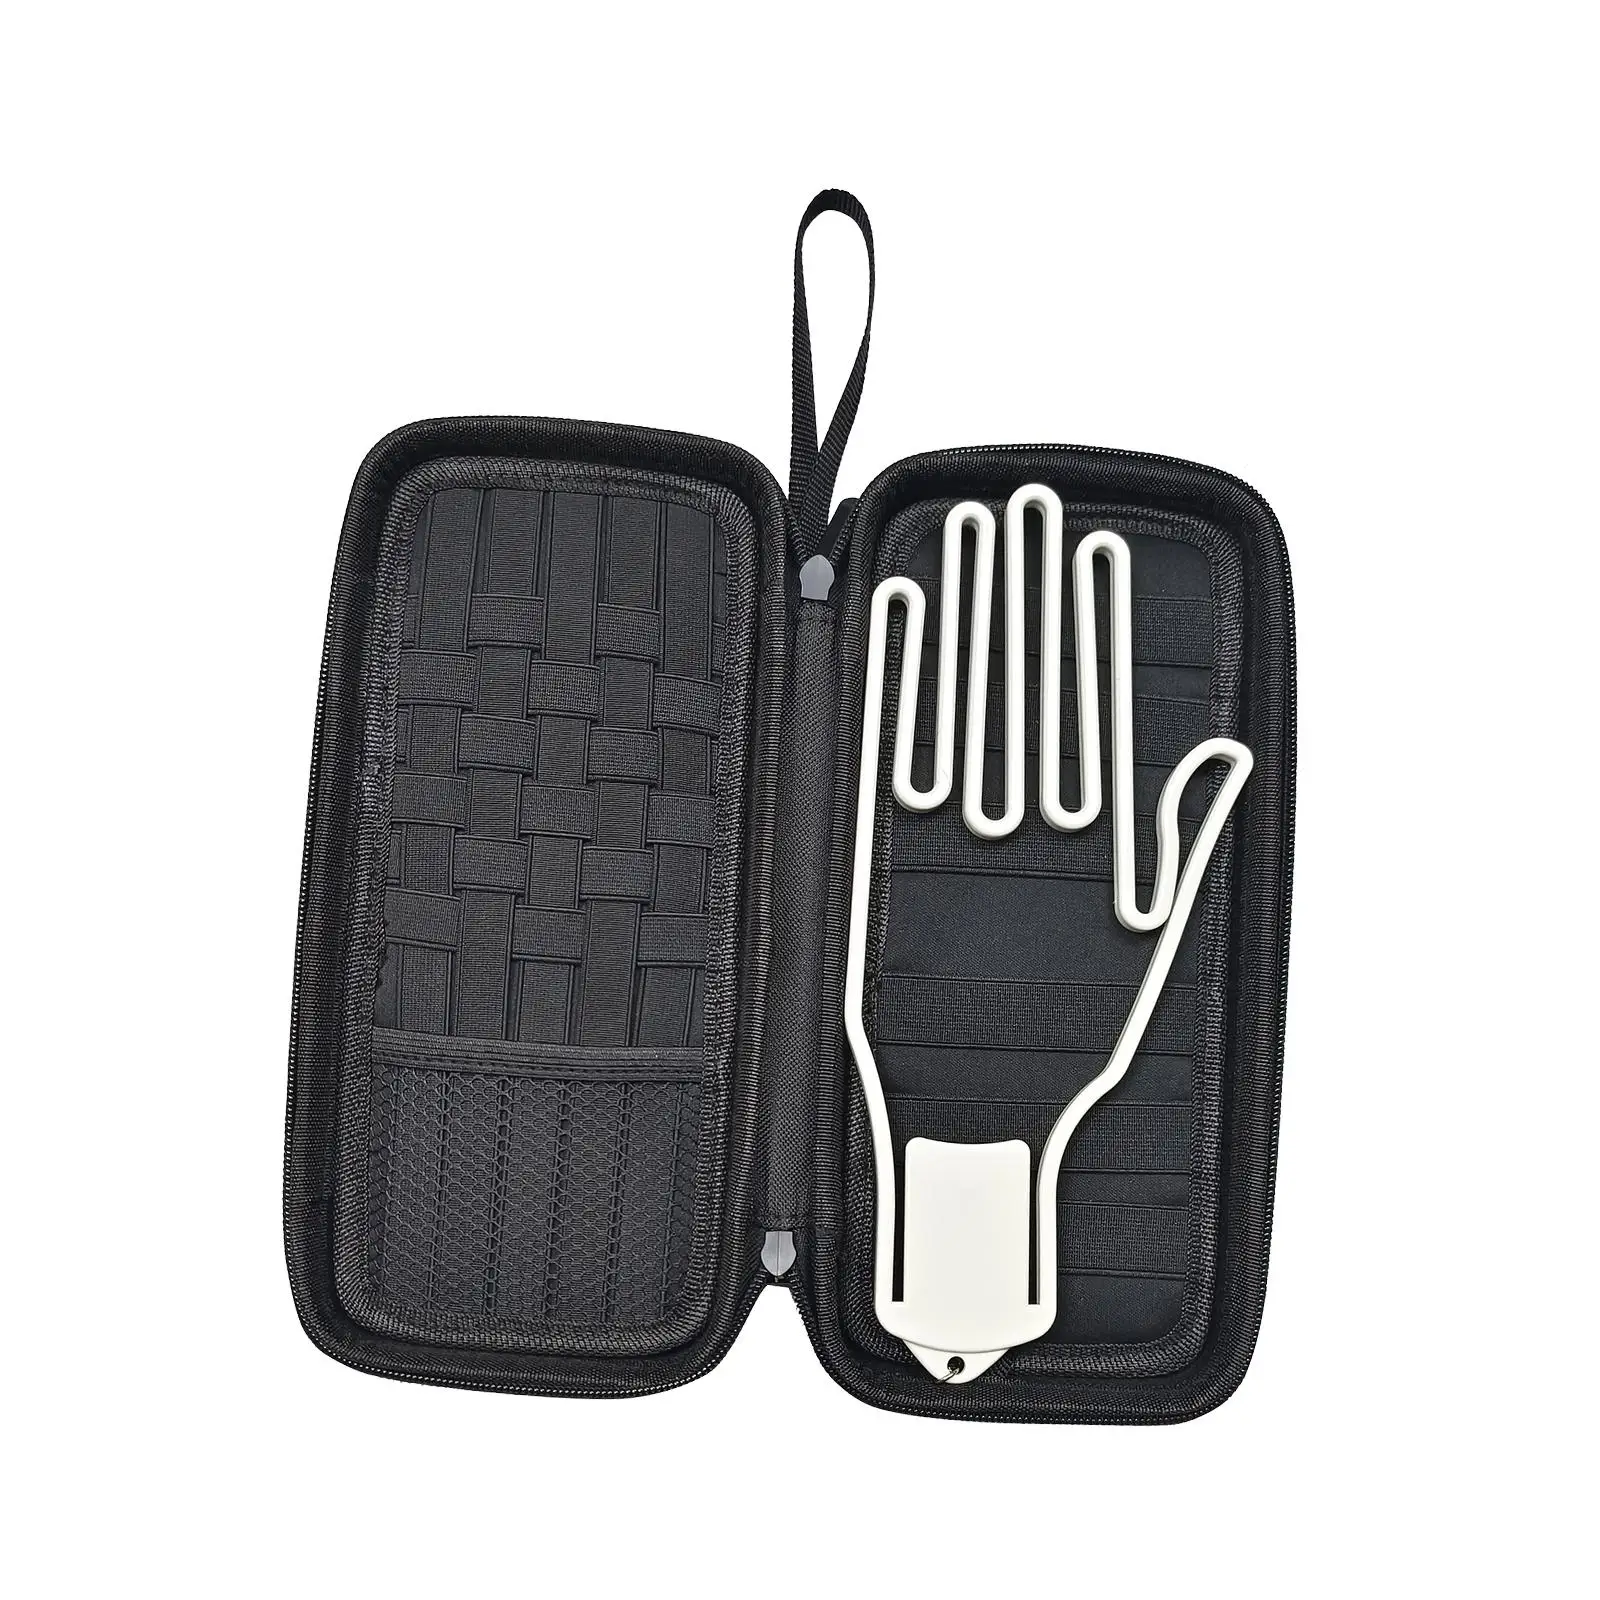 Golf Gloves Holder Universal with Attachable Glove Shaper Glove Caddie for Tees Repair Tools Ball Markers Essentials Phone